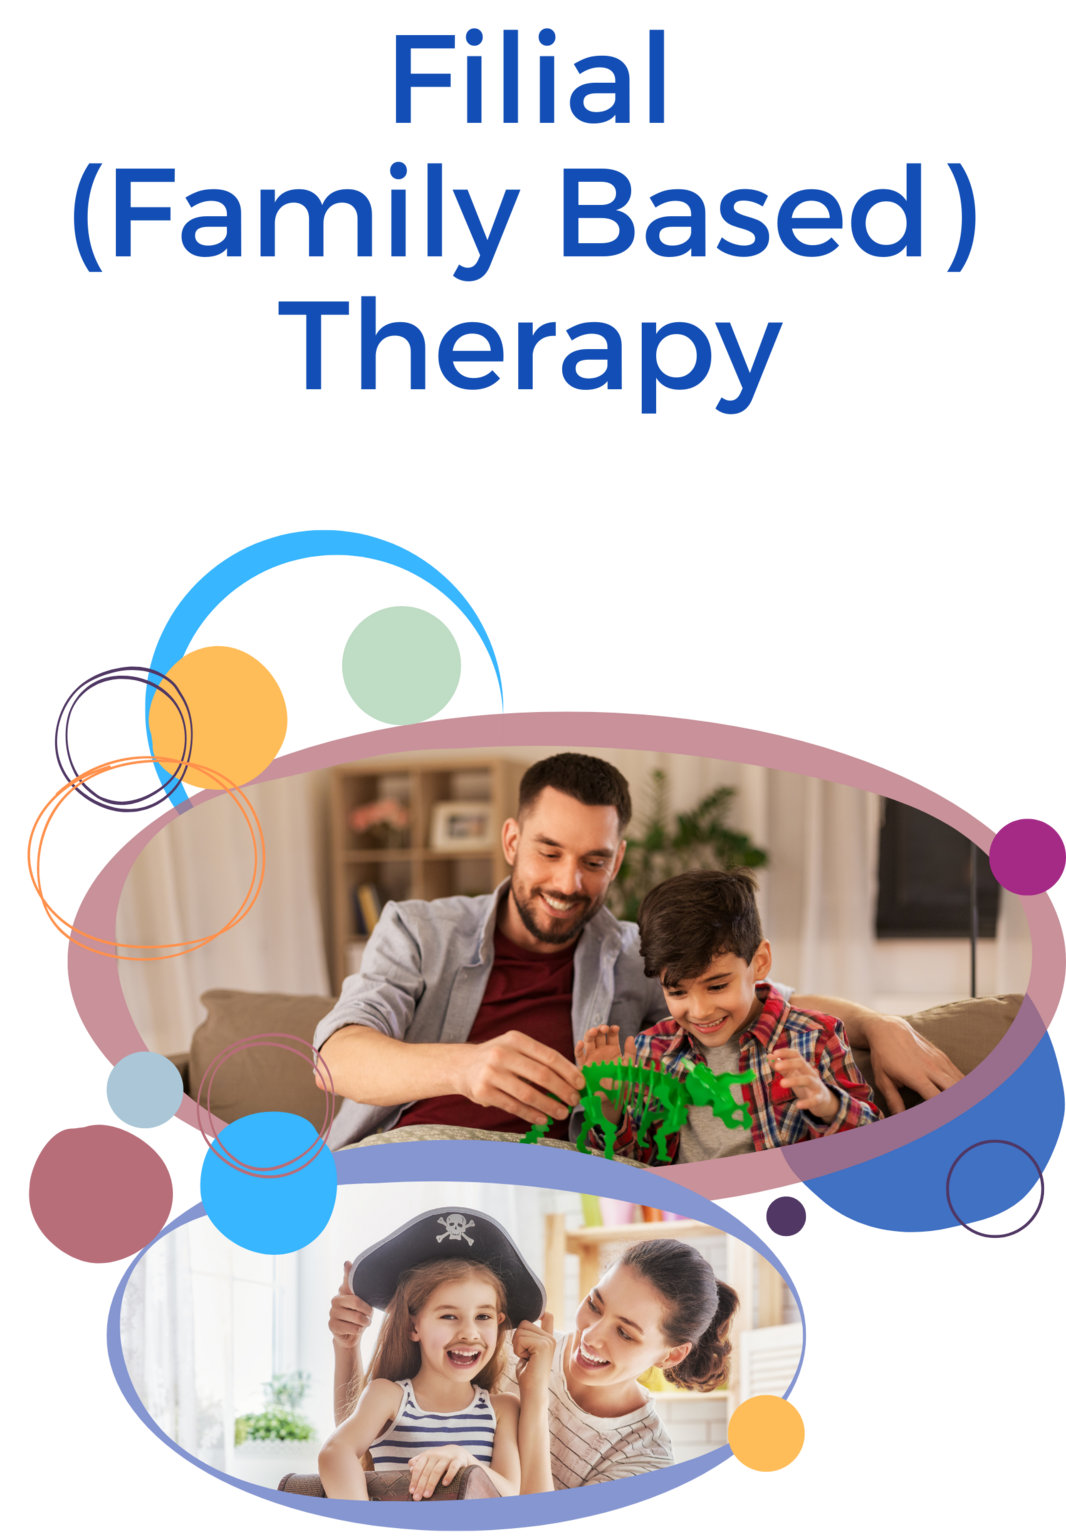 Occupational Therapy Theory and School-Based Filial Therapy